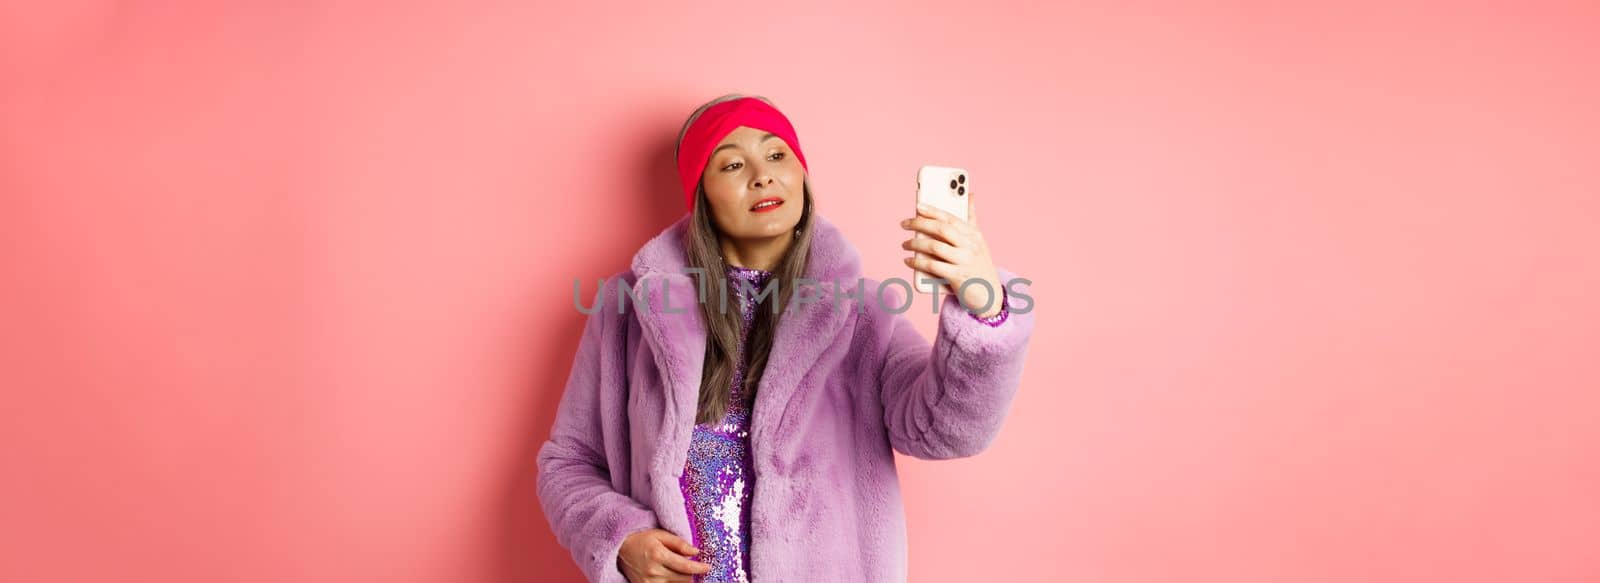 Fashion concept. Stylish asian senior female taking selfie on smartphone, posing in purple faux fur coat and party dress, standing over pink background.